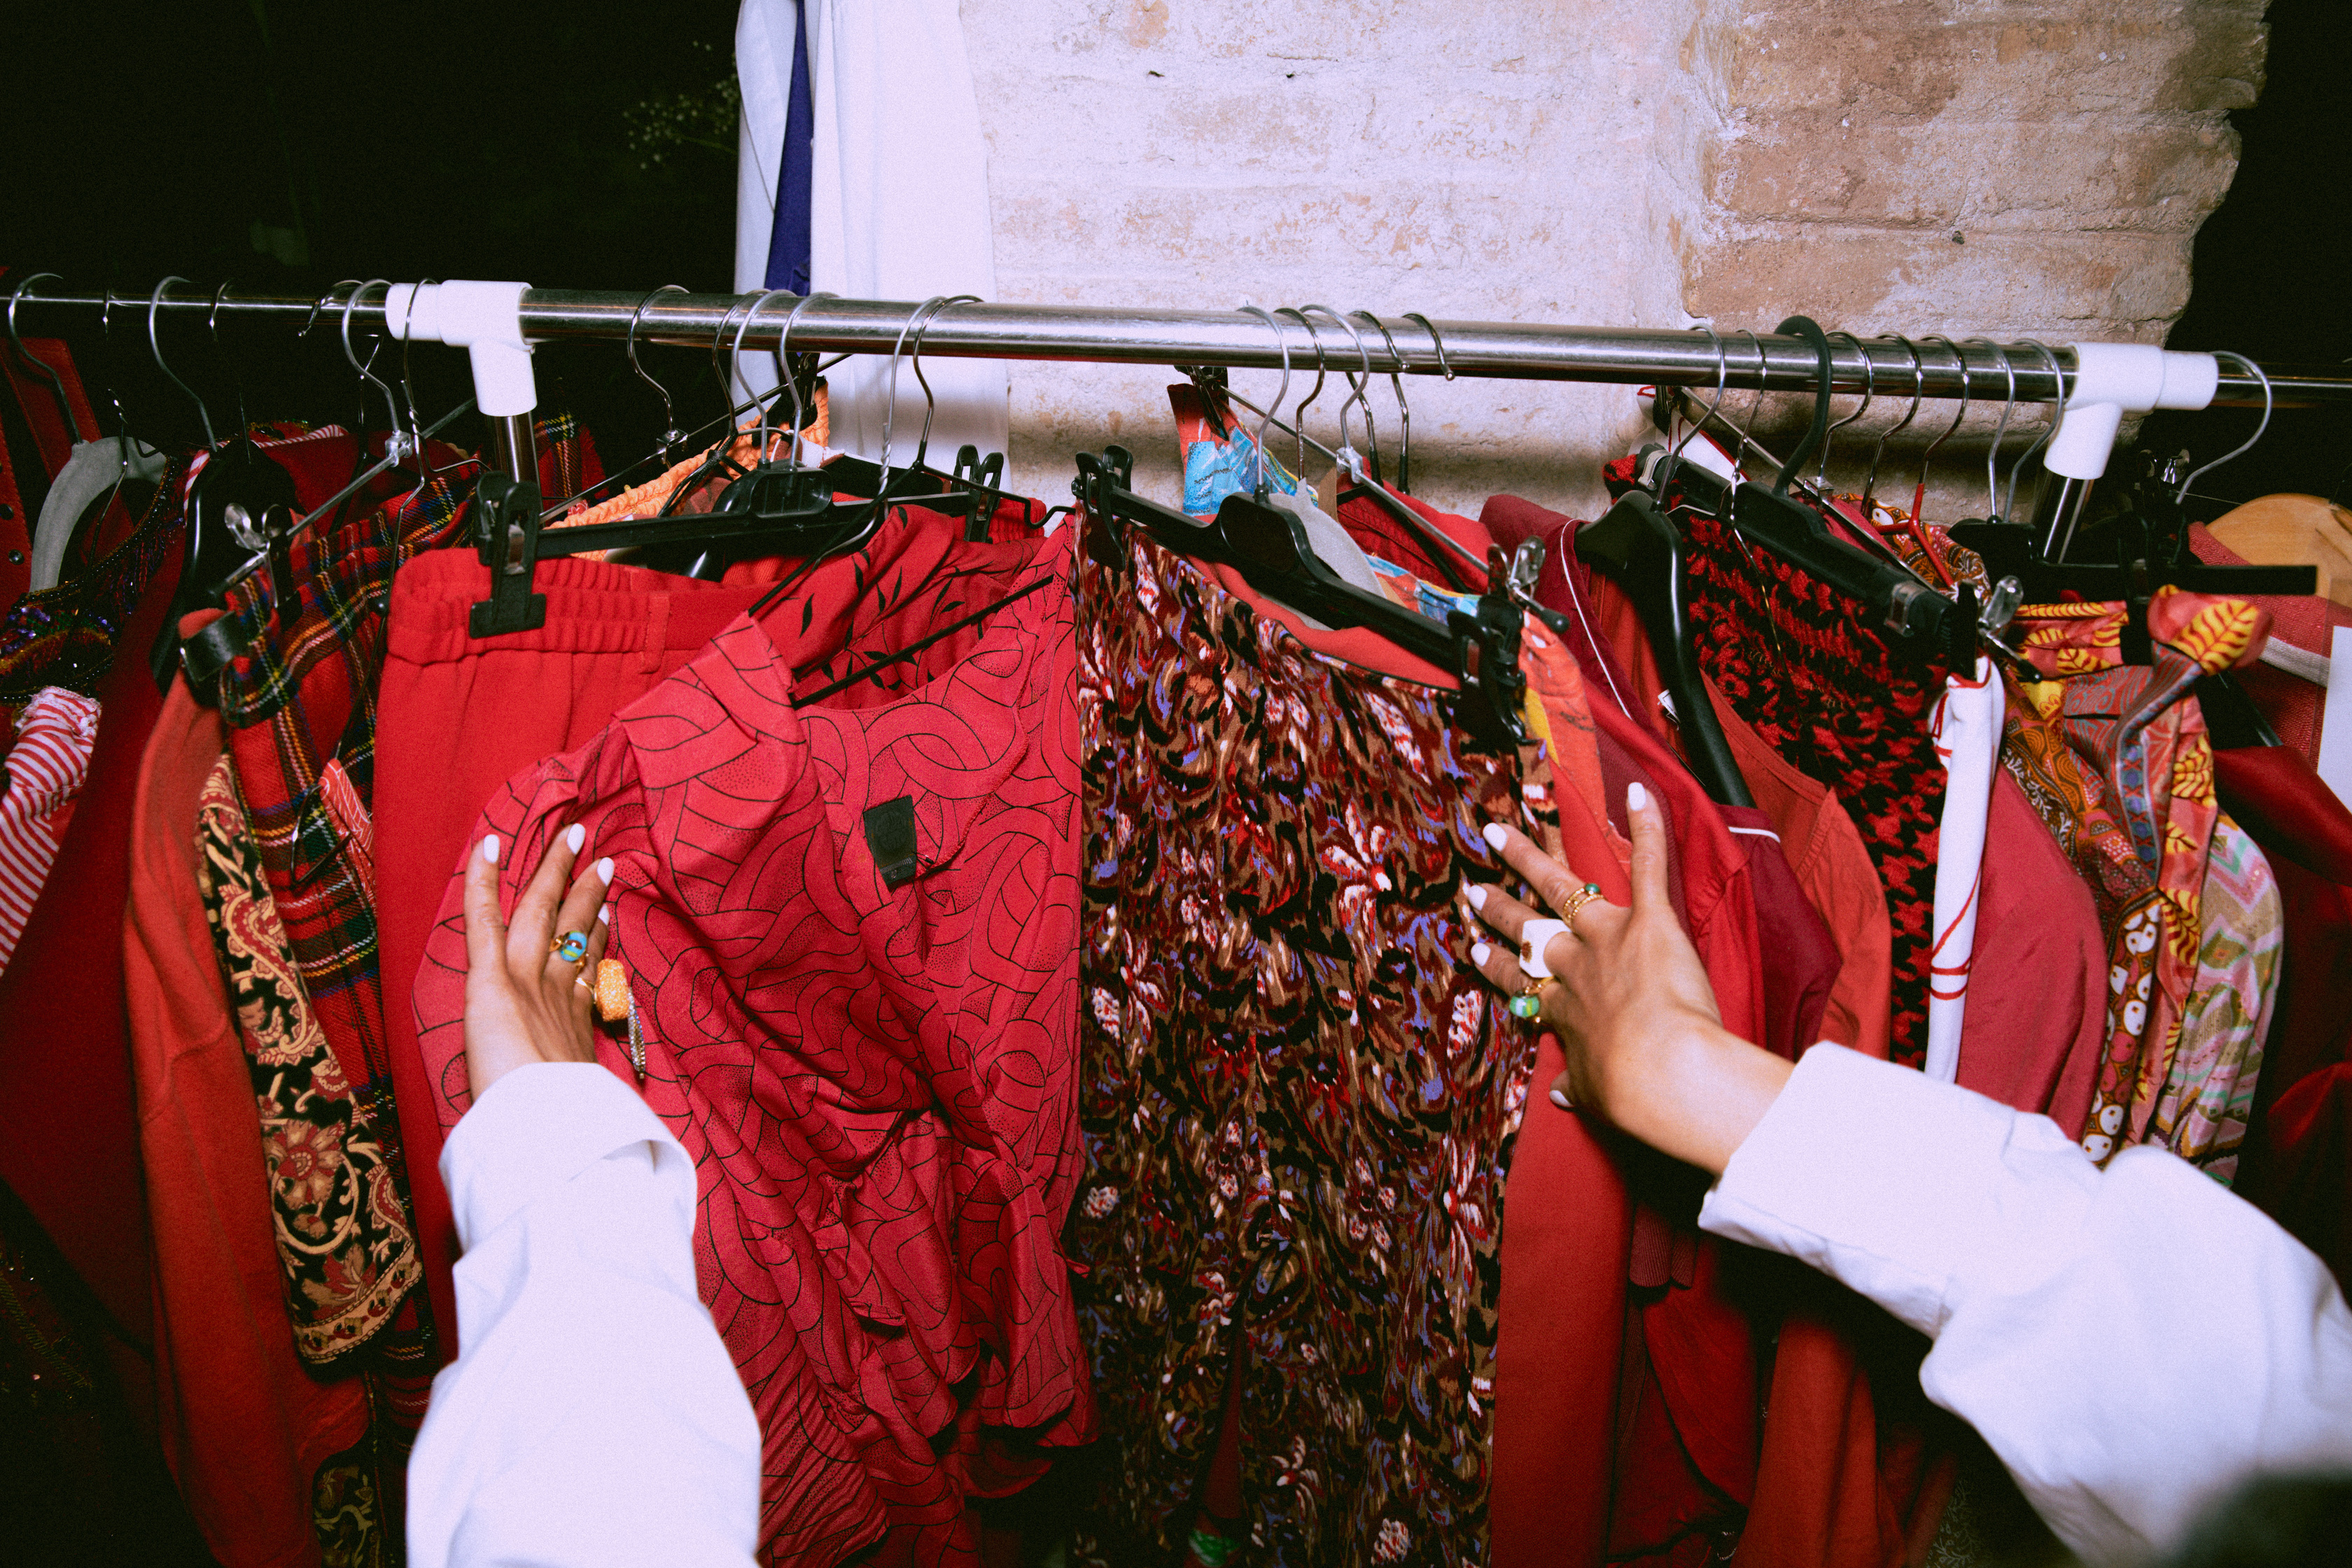 Woman Selecting Vintage Clothes in a Thrift Shop